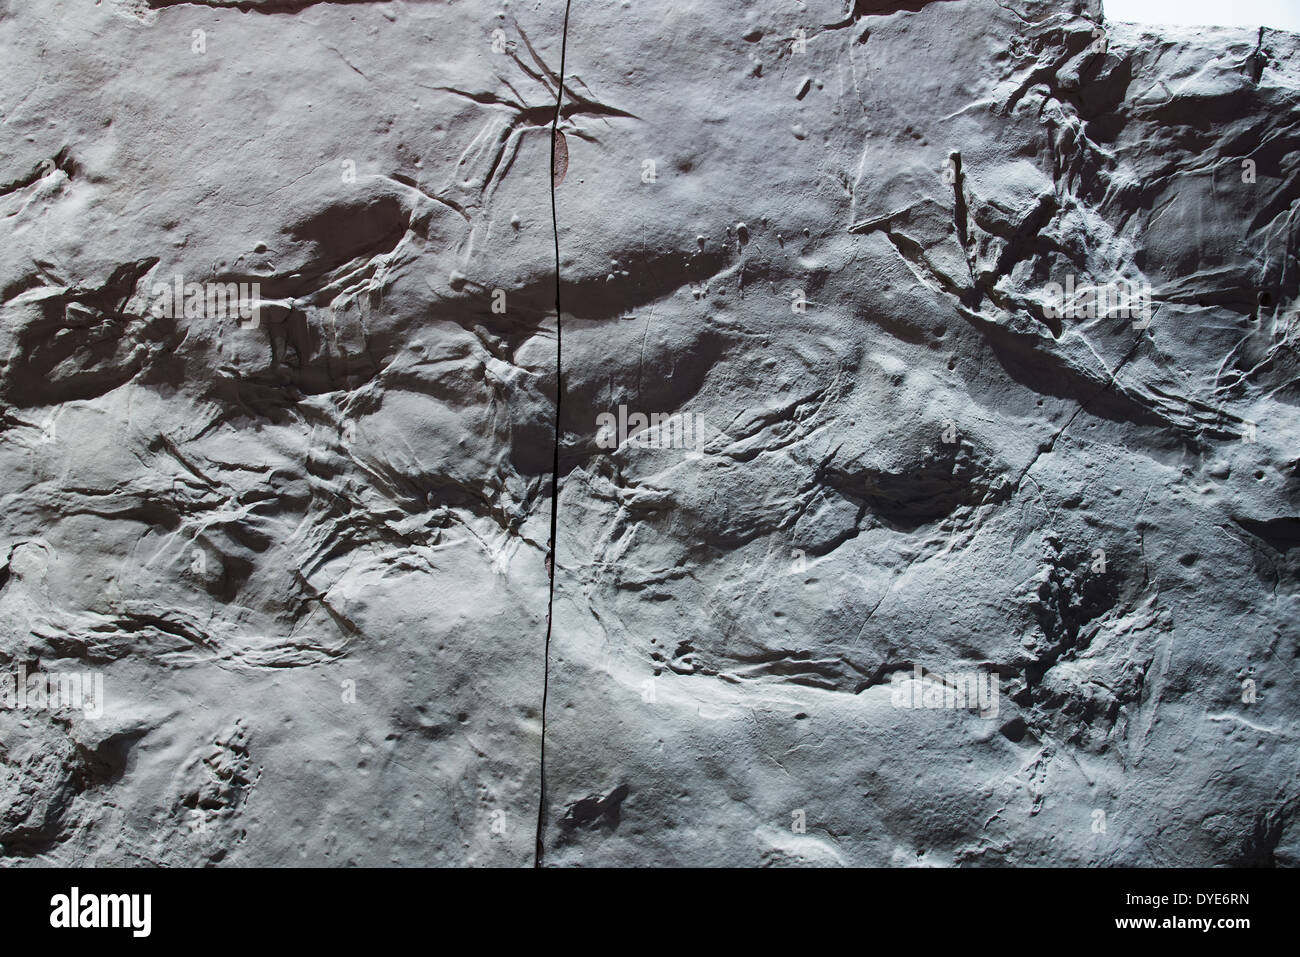 Fossilized footprints of multiple species dinosaurs and birds left on a mud-rock. Stock Photo